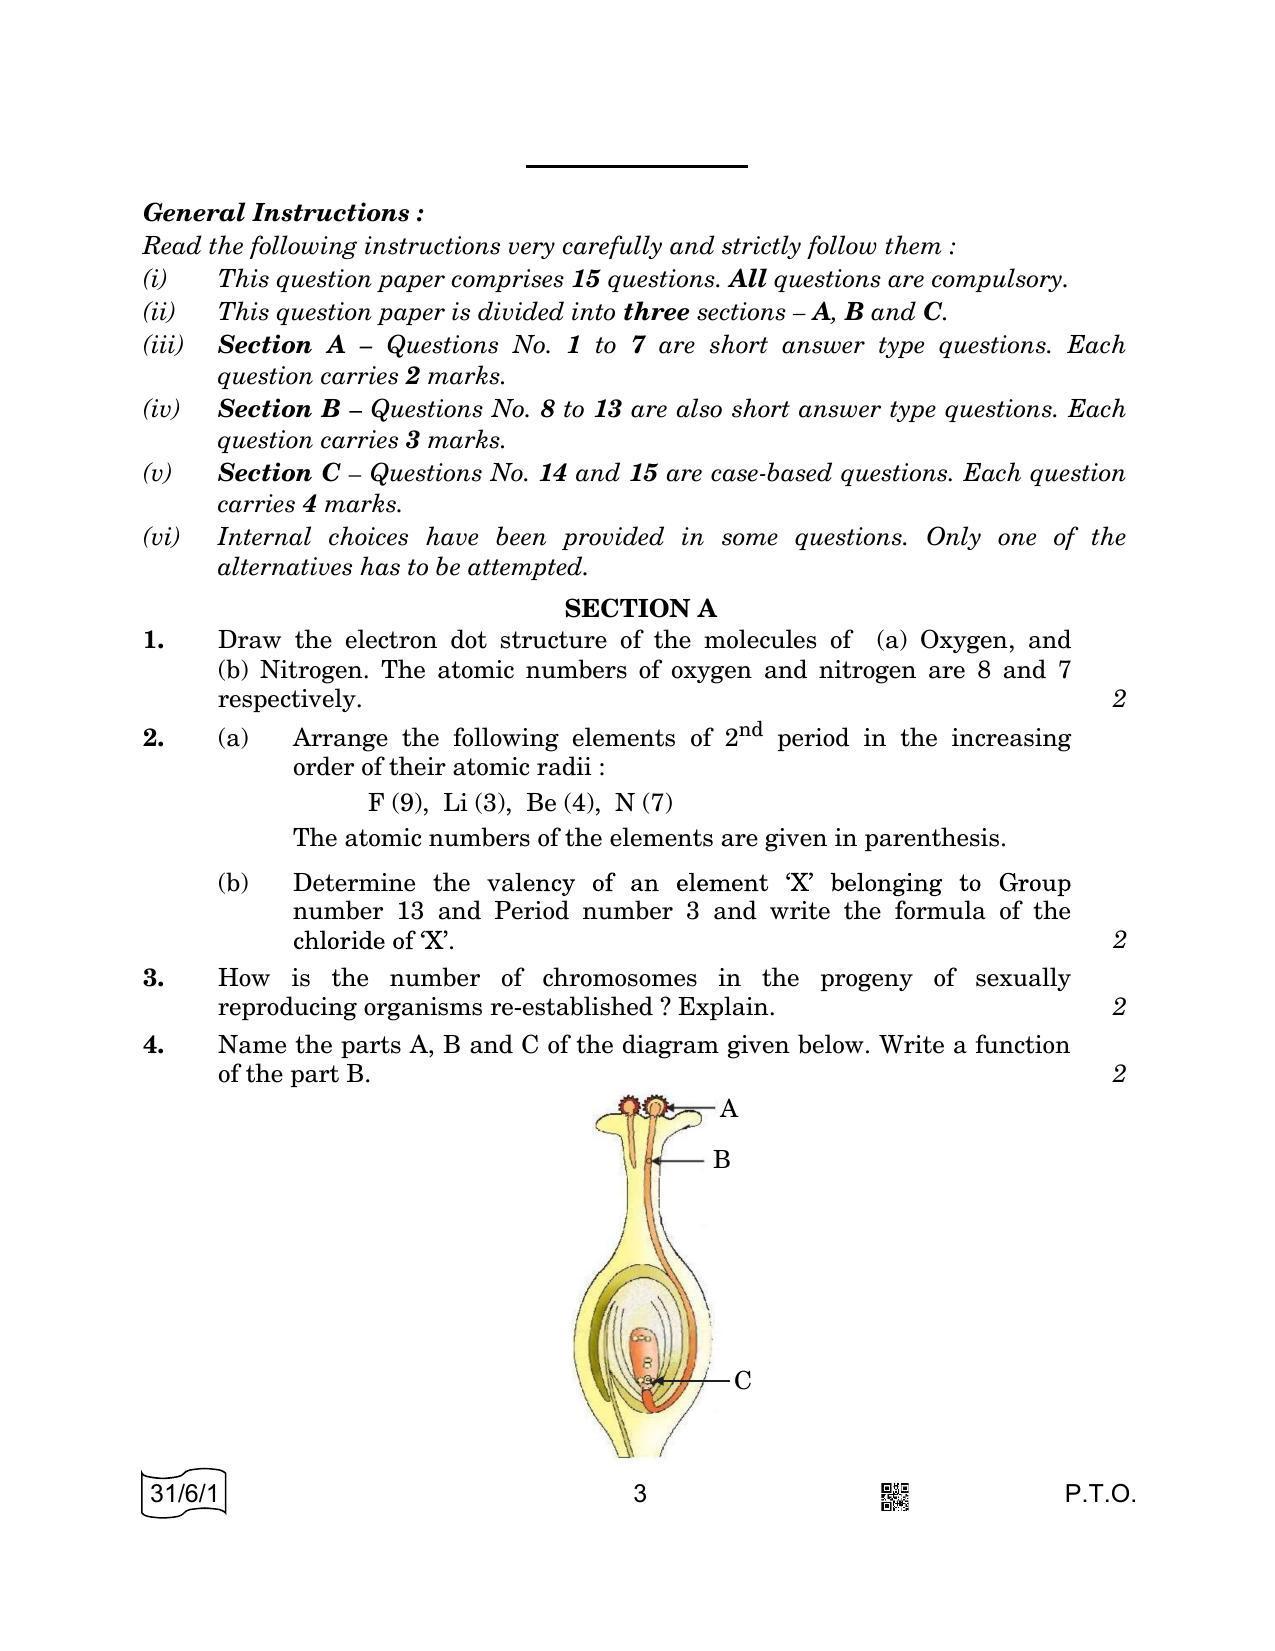 CBSE Class 10 31-6-1 SCIENCE 2022 Compartment Question Paper - Page 3